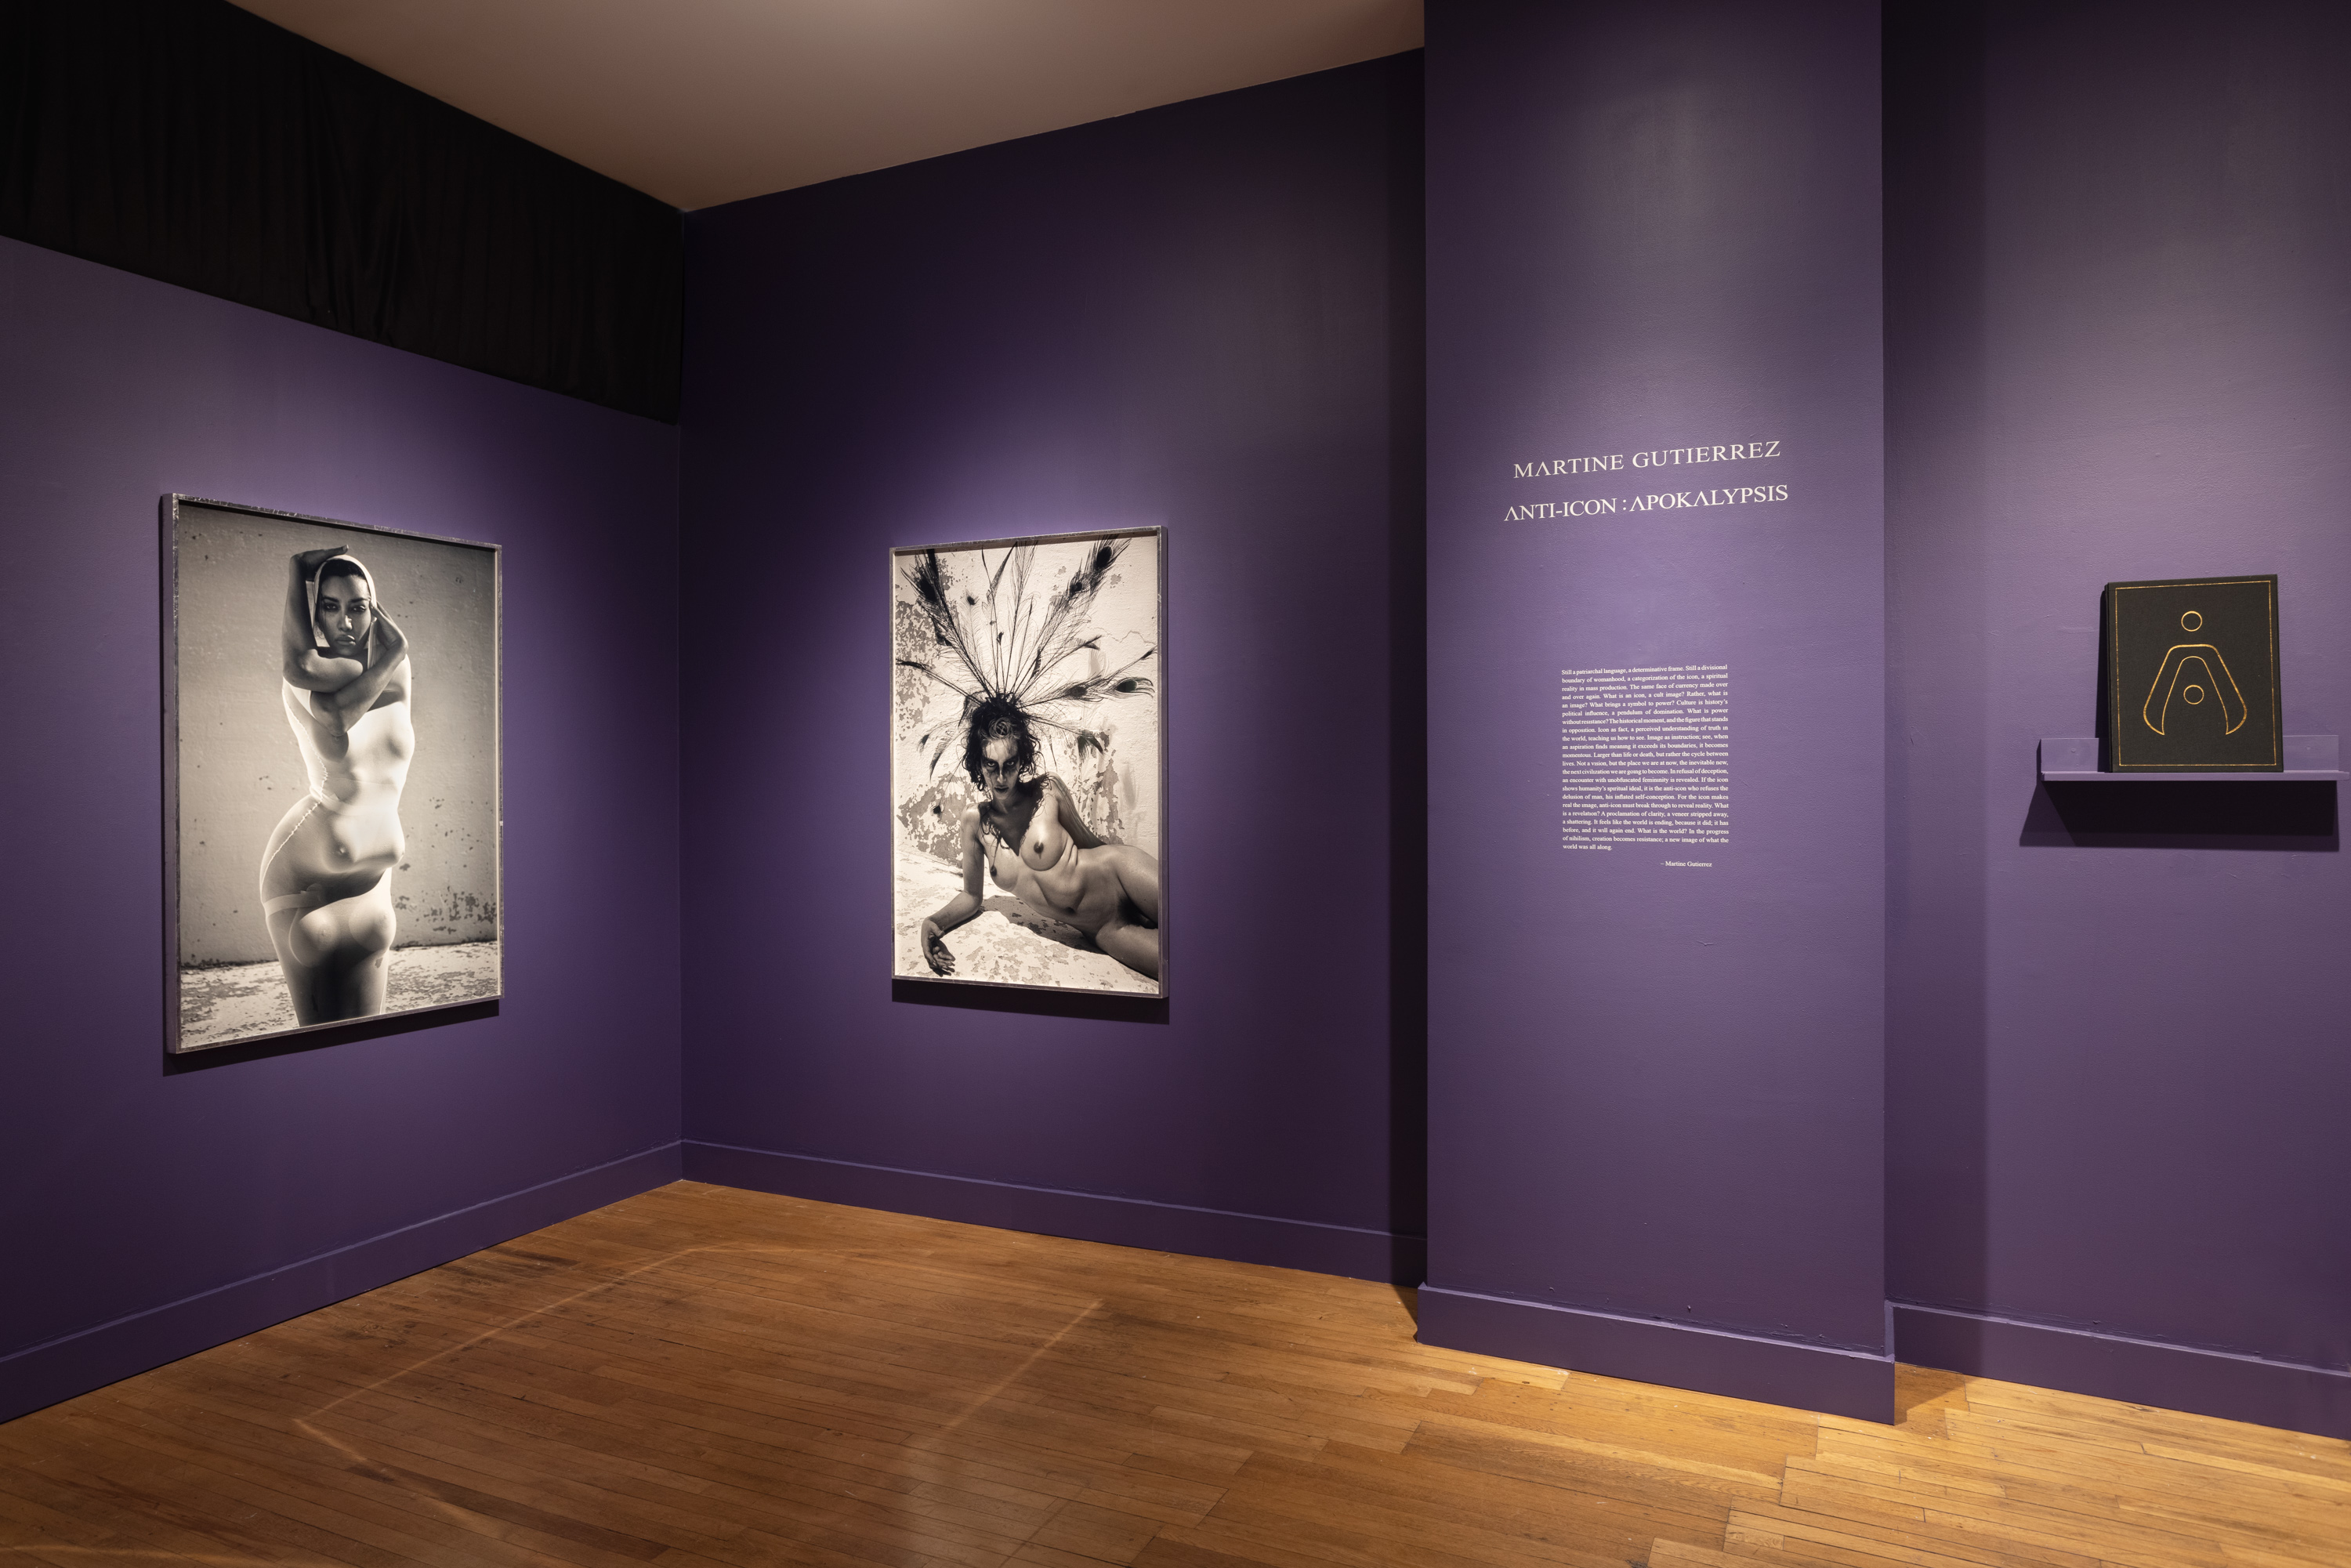 Color image of exhibition with two framed black and white photographs on purple walls with book and exhibition text